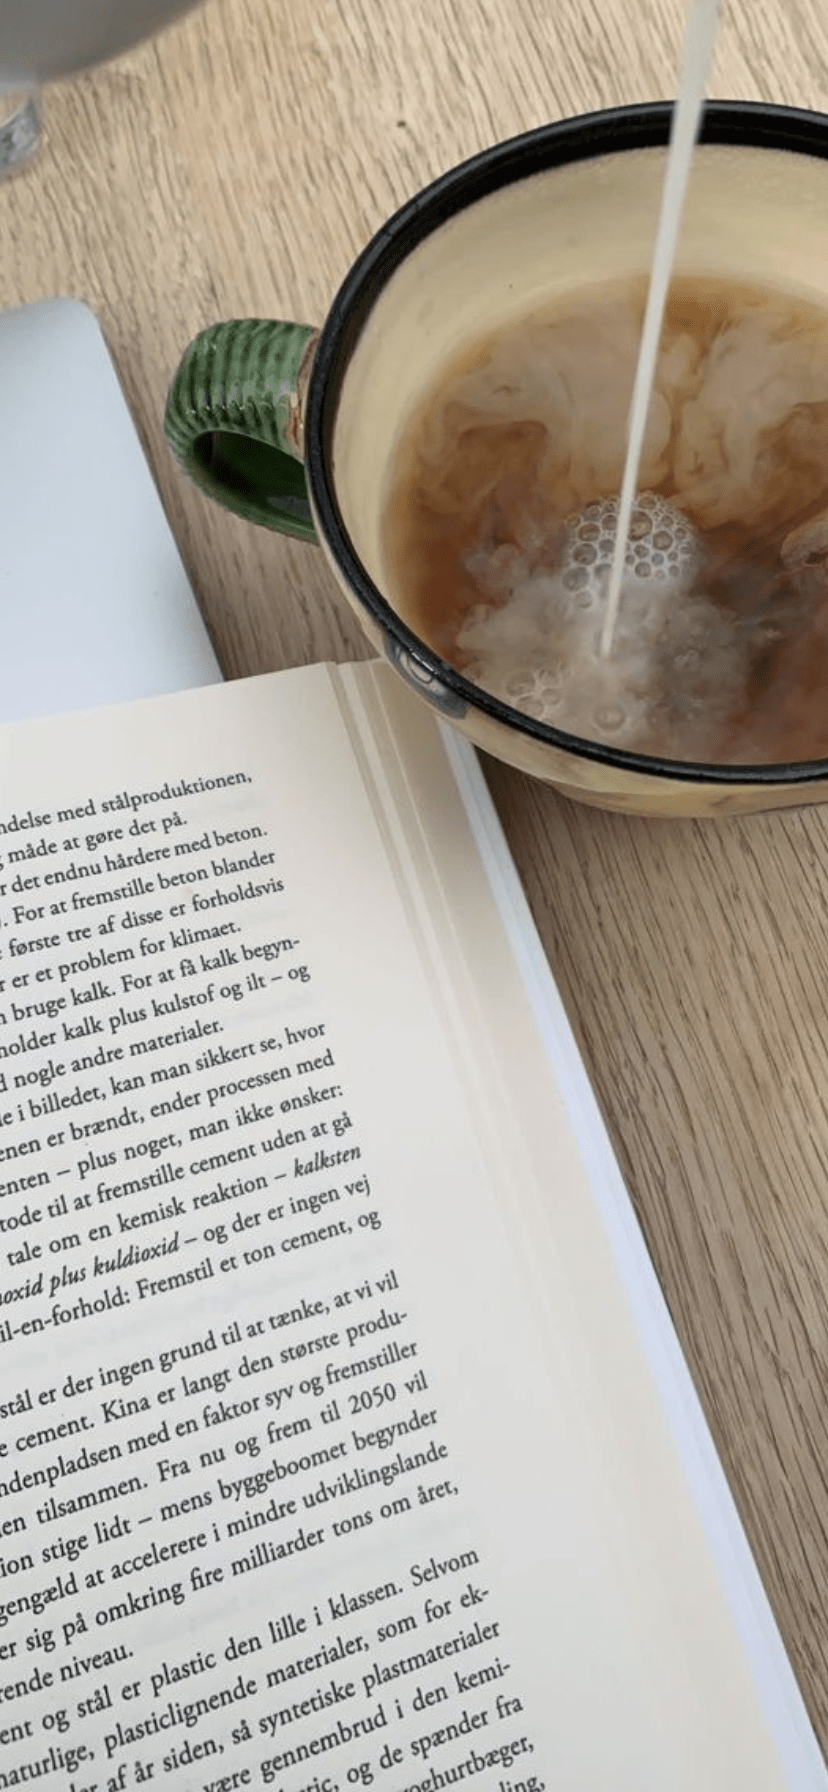 A book is open and there are cups of coffee - Coffee